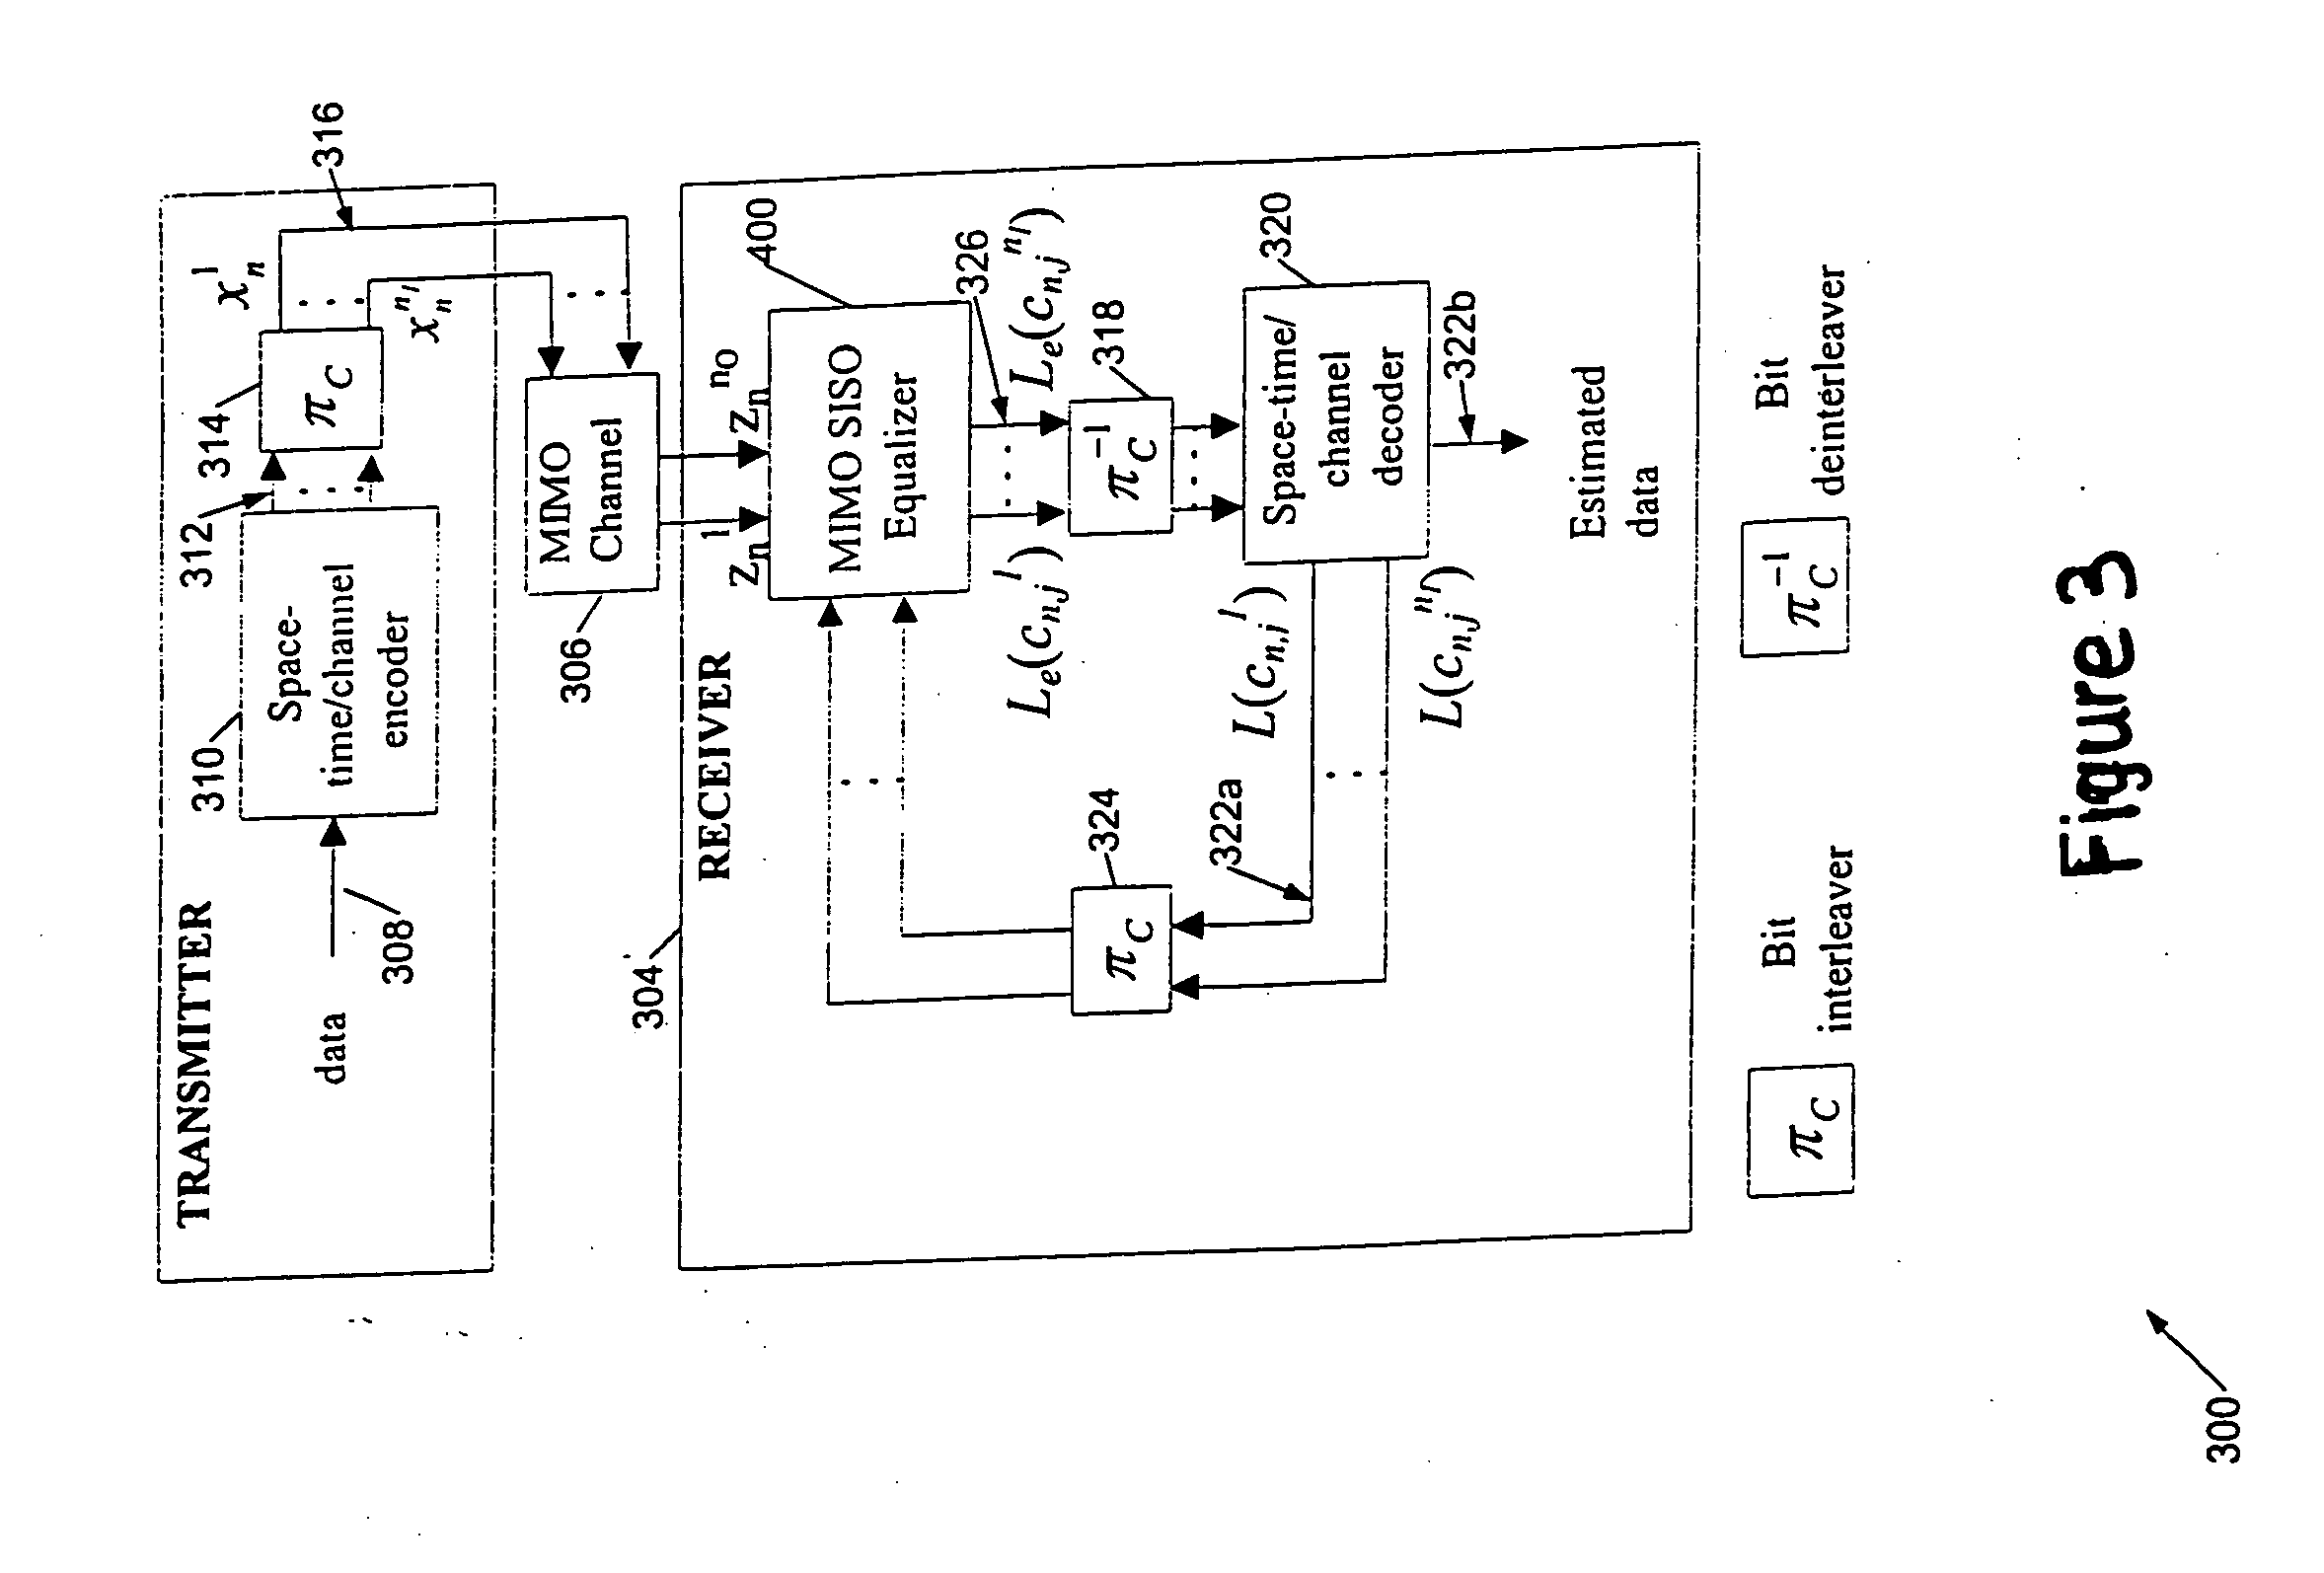 Communications apparatus and methods